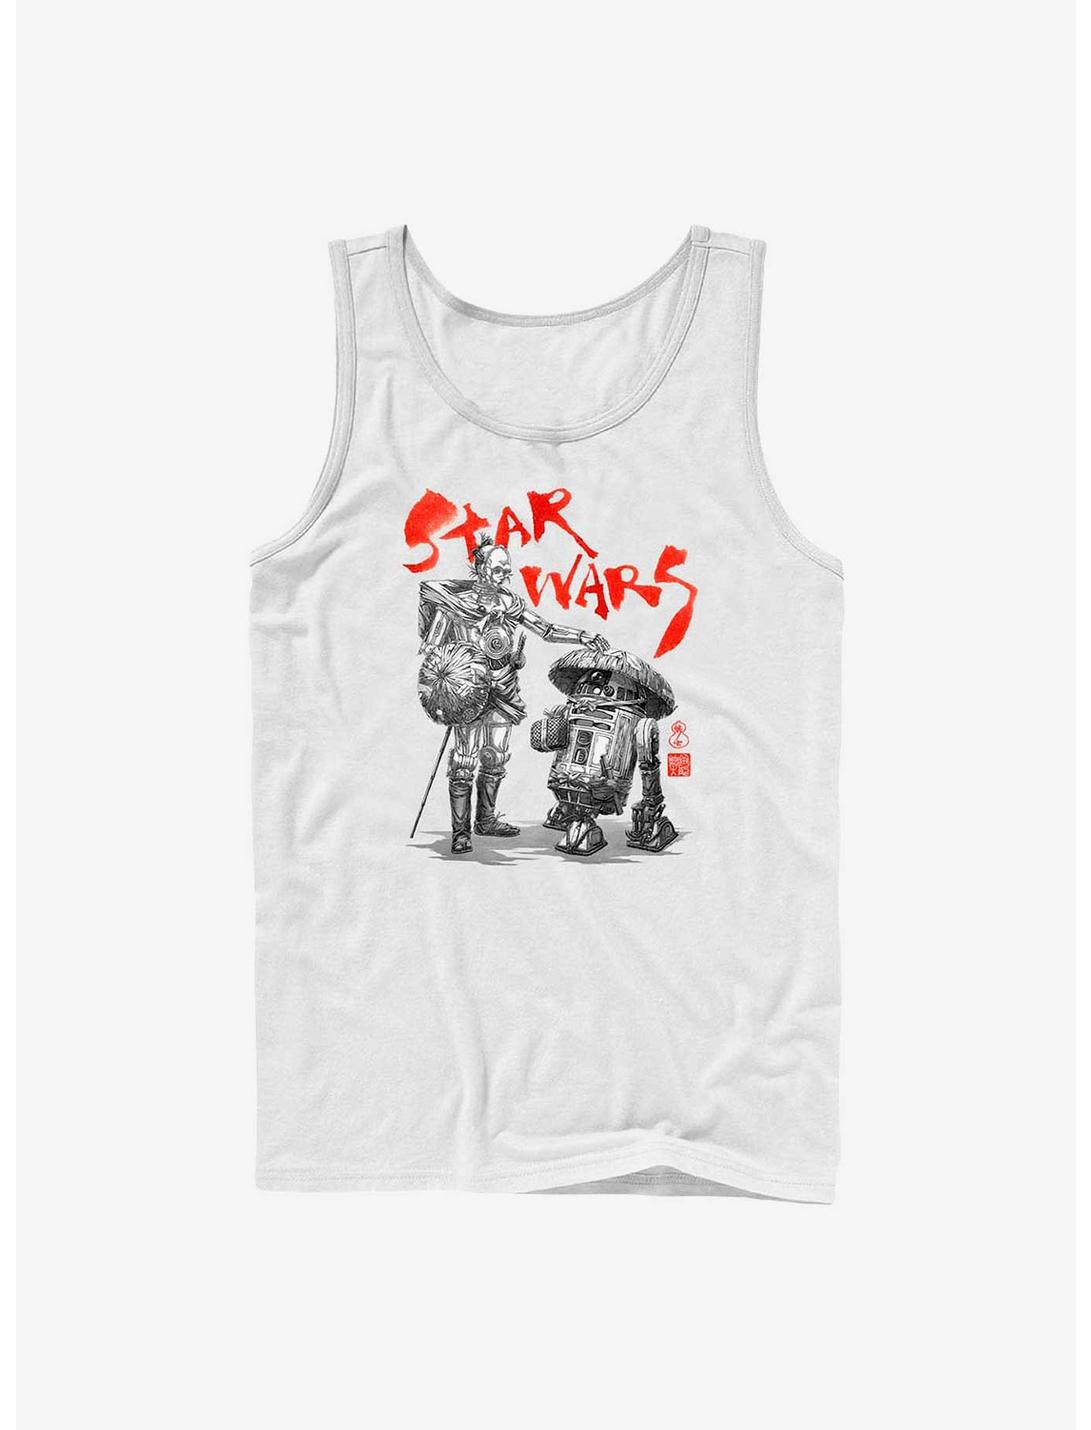 Star Wars: Visions Anime Droids Tank Top, WHITE, hi-res